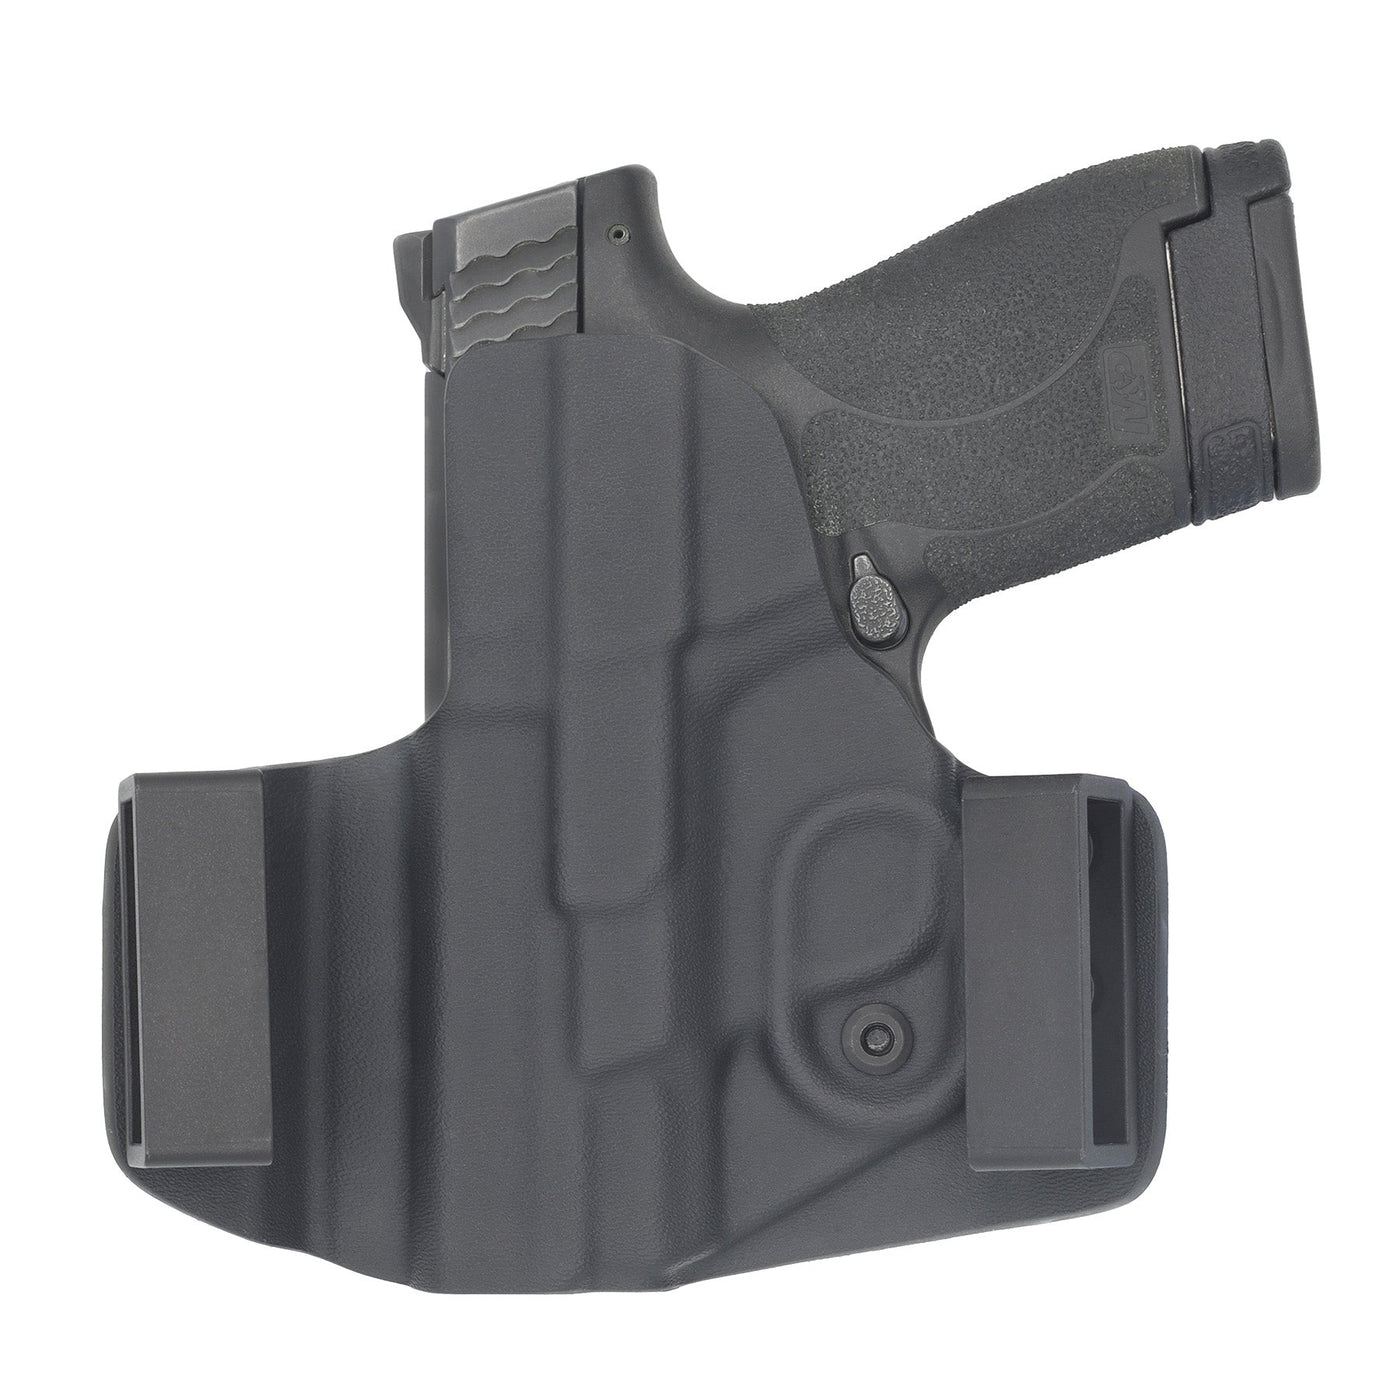 C&G Holsters quick ship Covert OWB kydex holster for Smith & Wesson M&P Shield 9/40 in black rear view